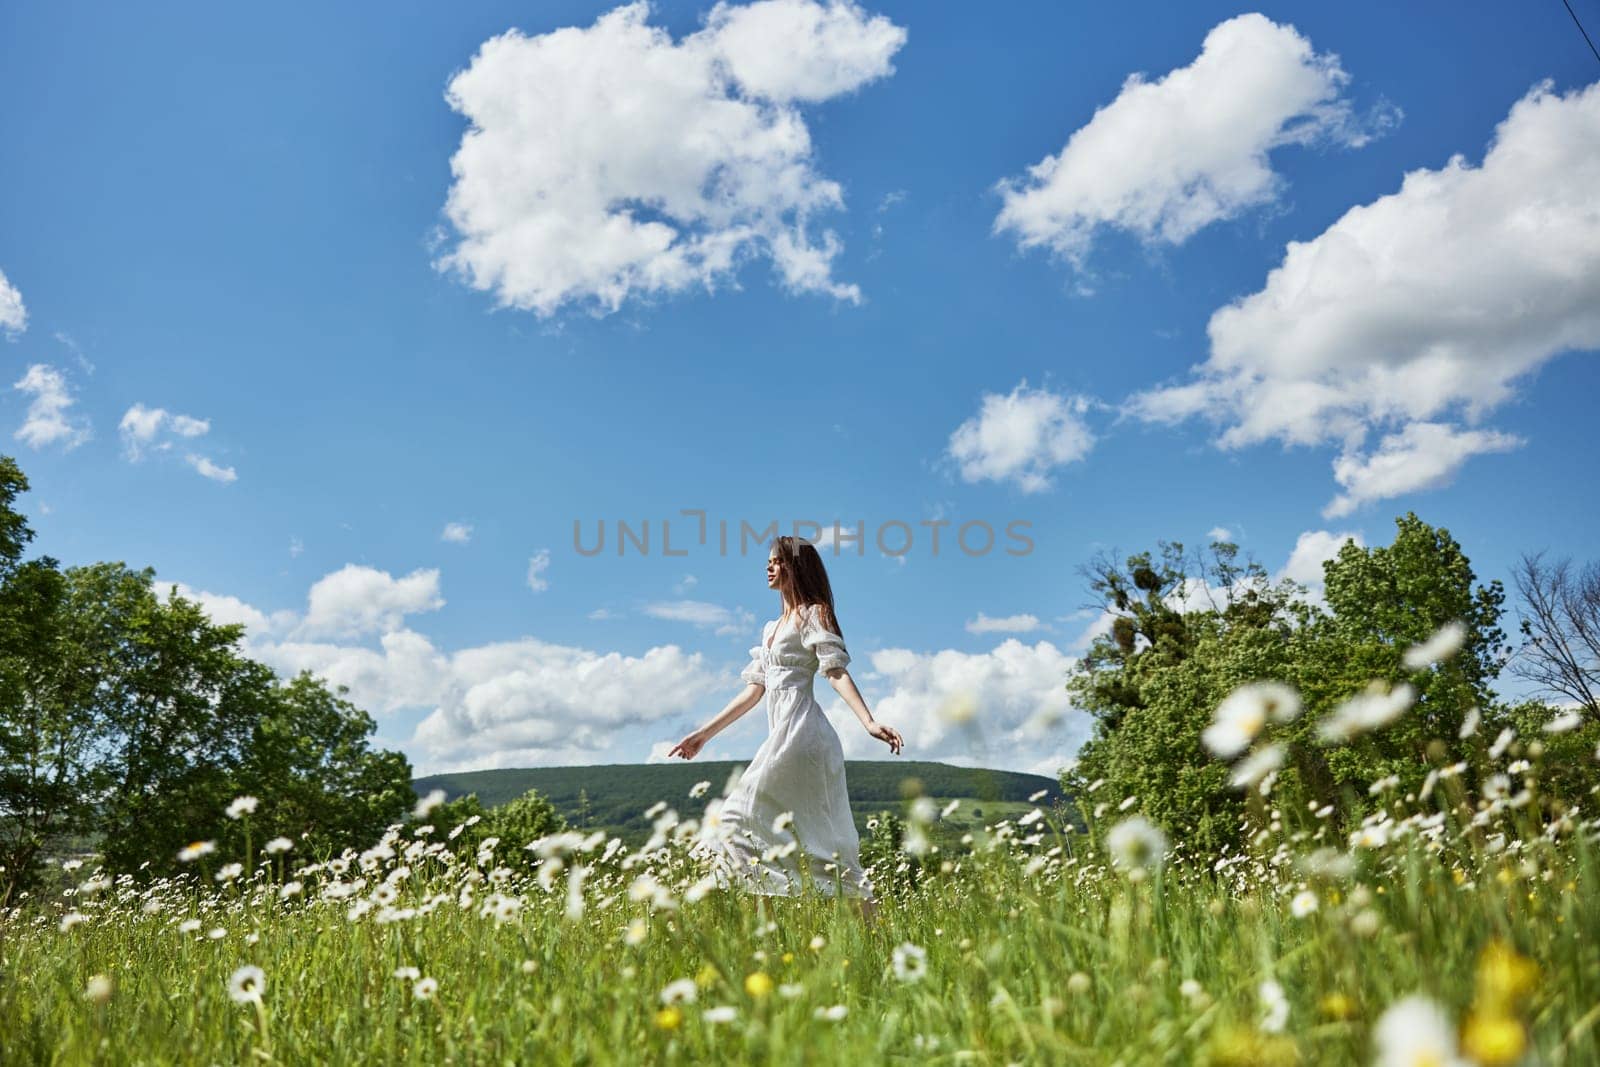 a woman in a light dress runs far across a chamomile field against a blue sky, enjoying harmony with nature by Vichizh